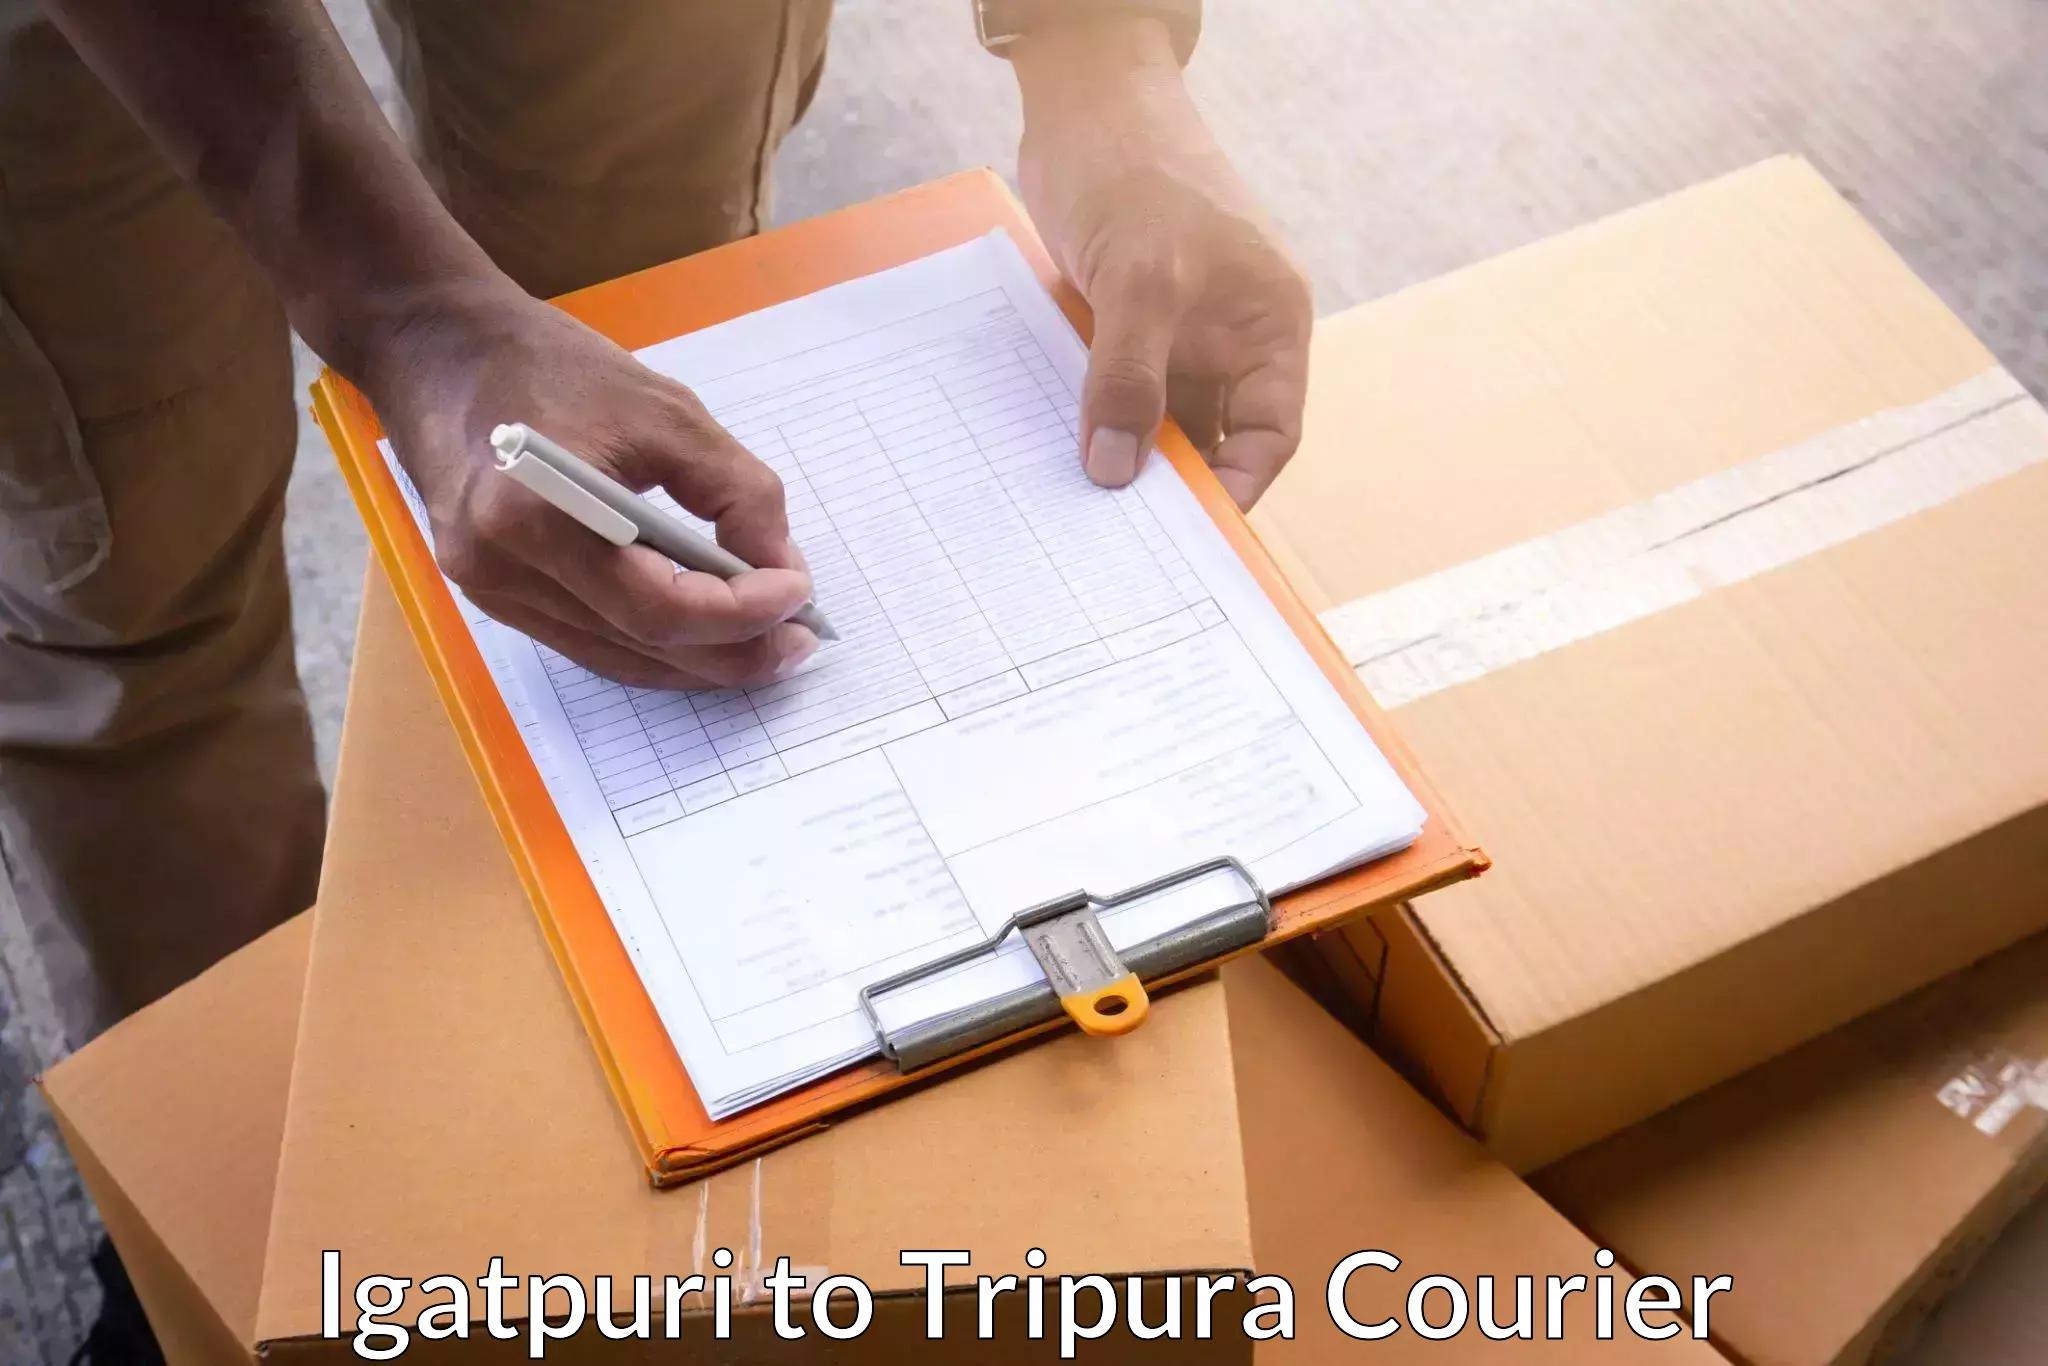 Courier tracking online in Igatpuri to Tripura